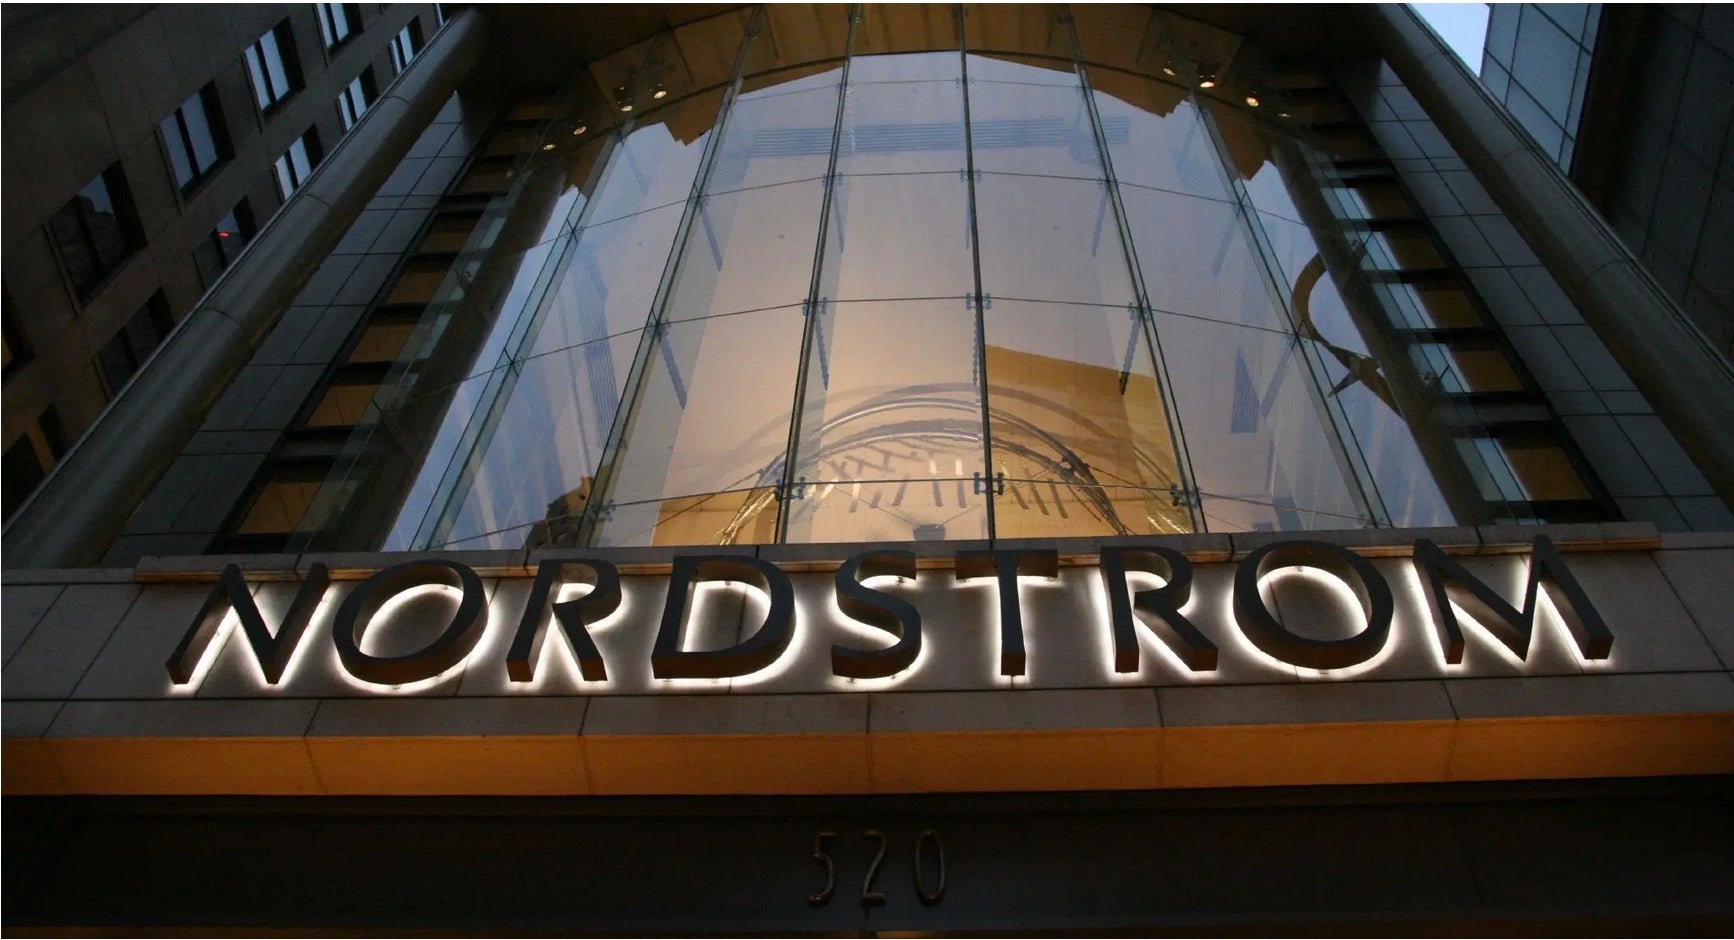 Nordstrom Reports Weaker Than Expected Holiday Sales: 4 Analysts Weigh In